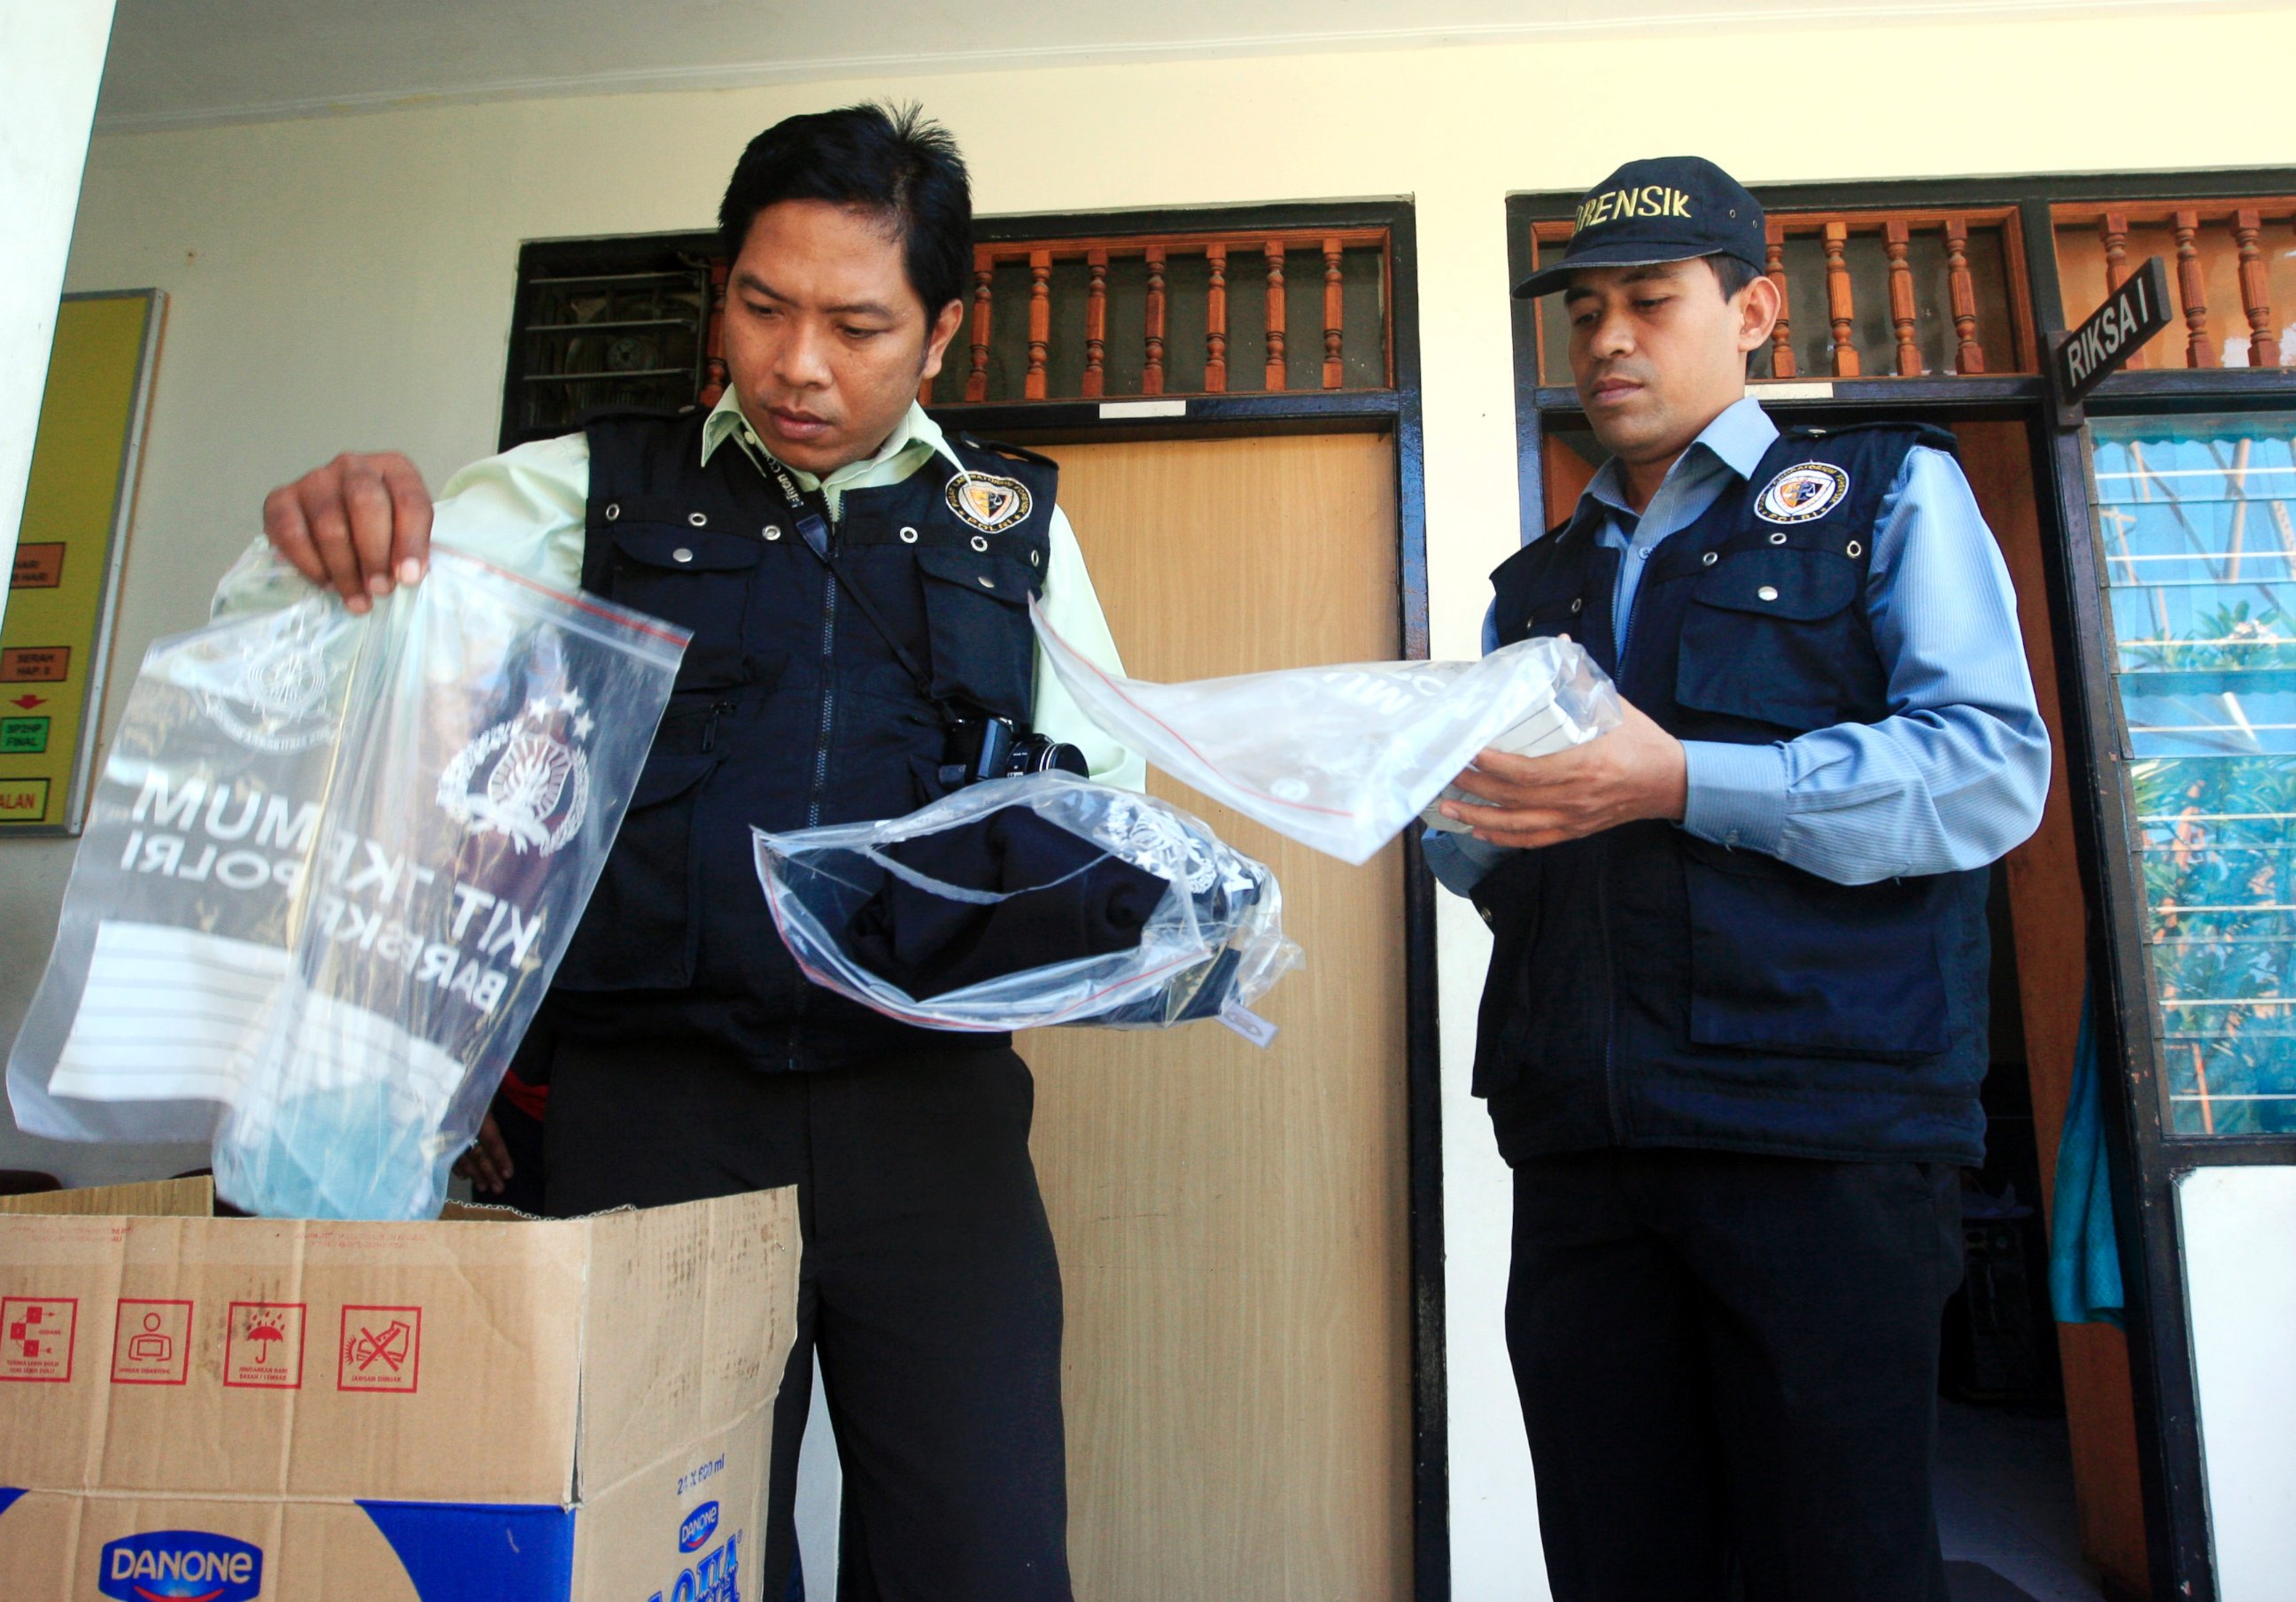 PHOTO: Indonesian forensic police officers view evidence related to the death of an American woman at a police station in Bali, Indonesia, Aug. 13, 2014.